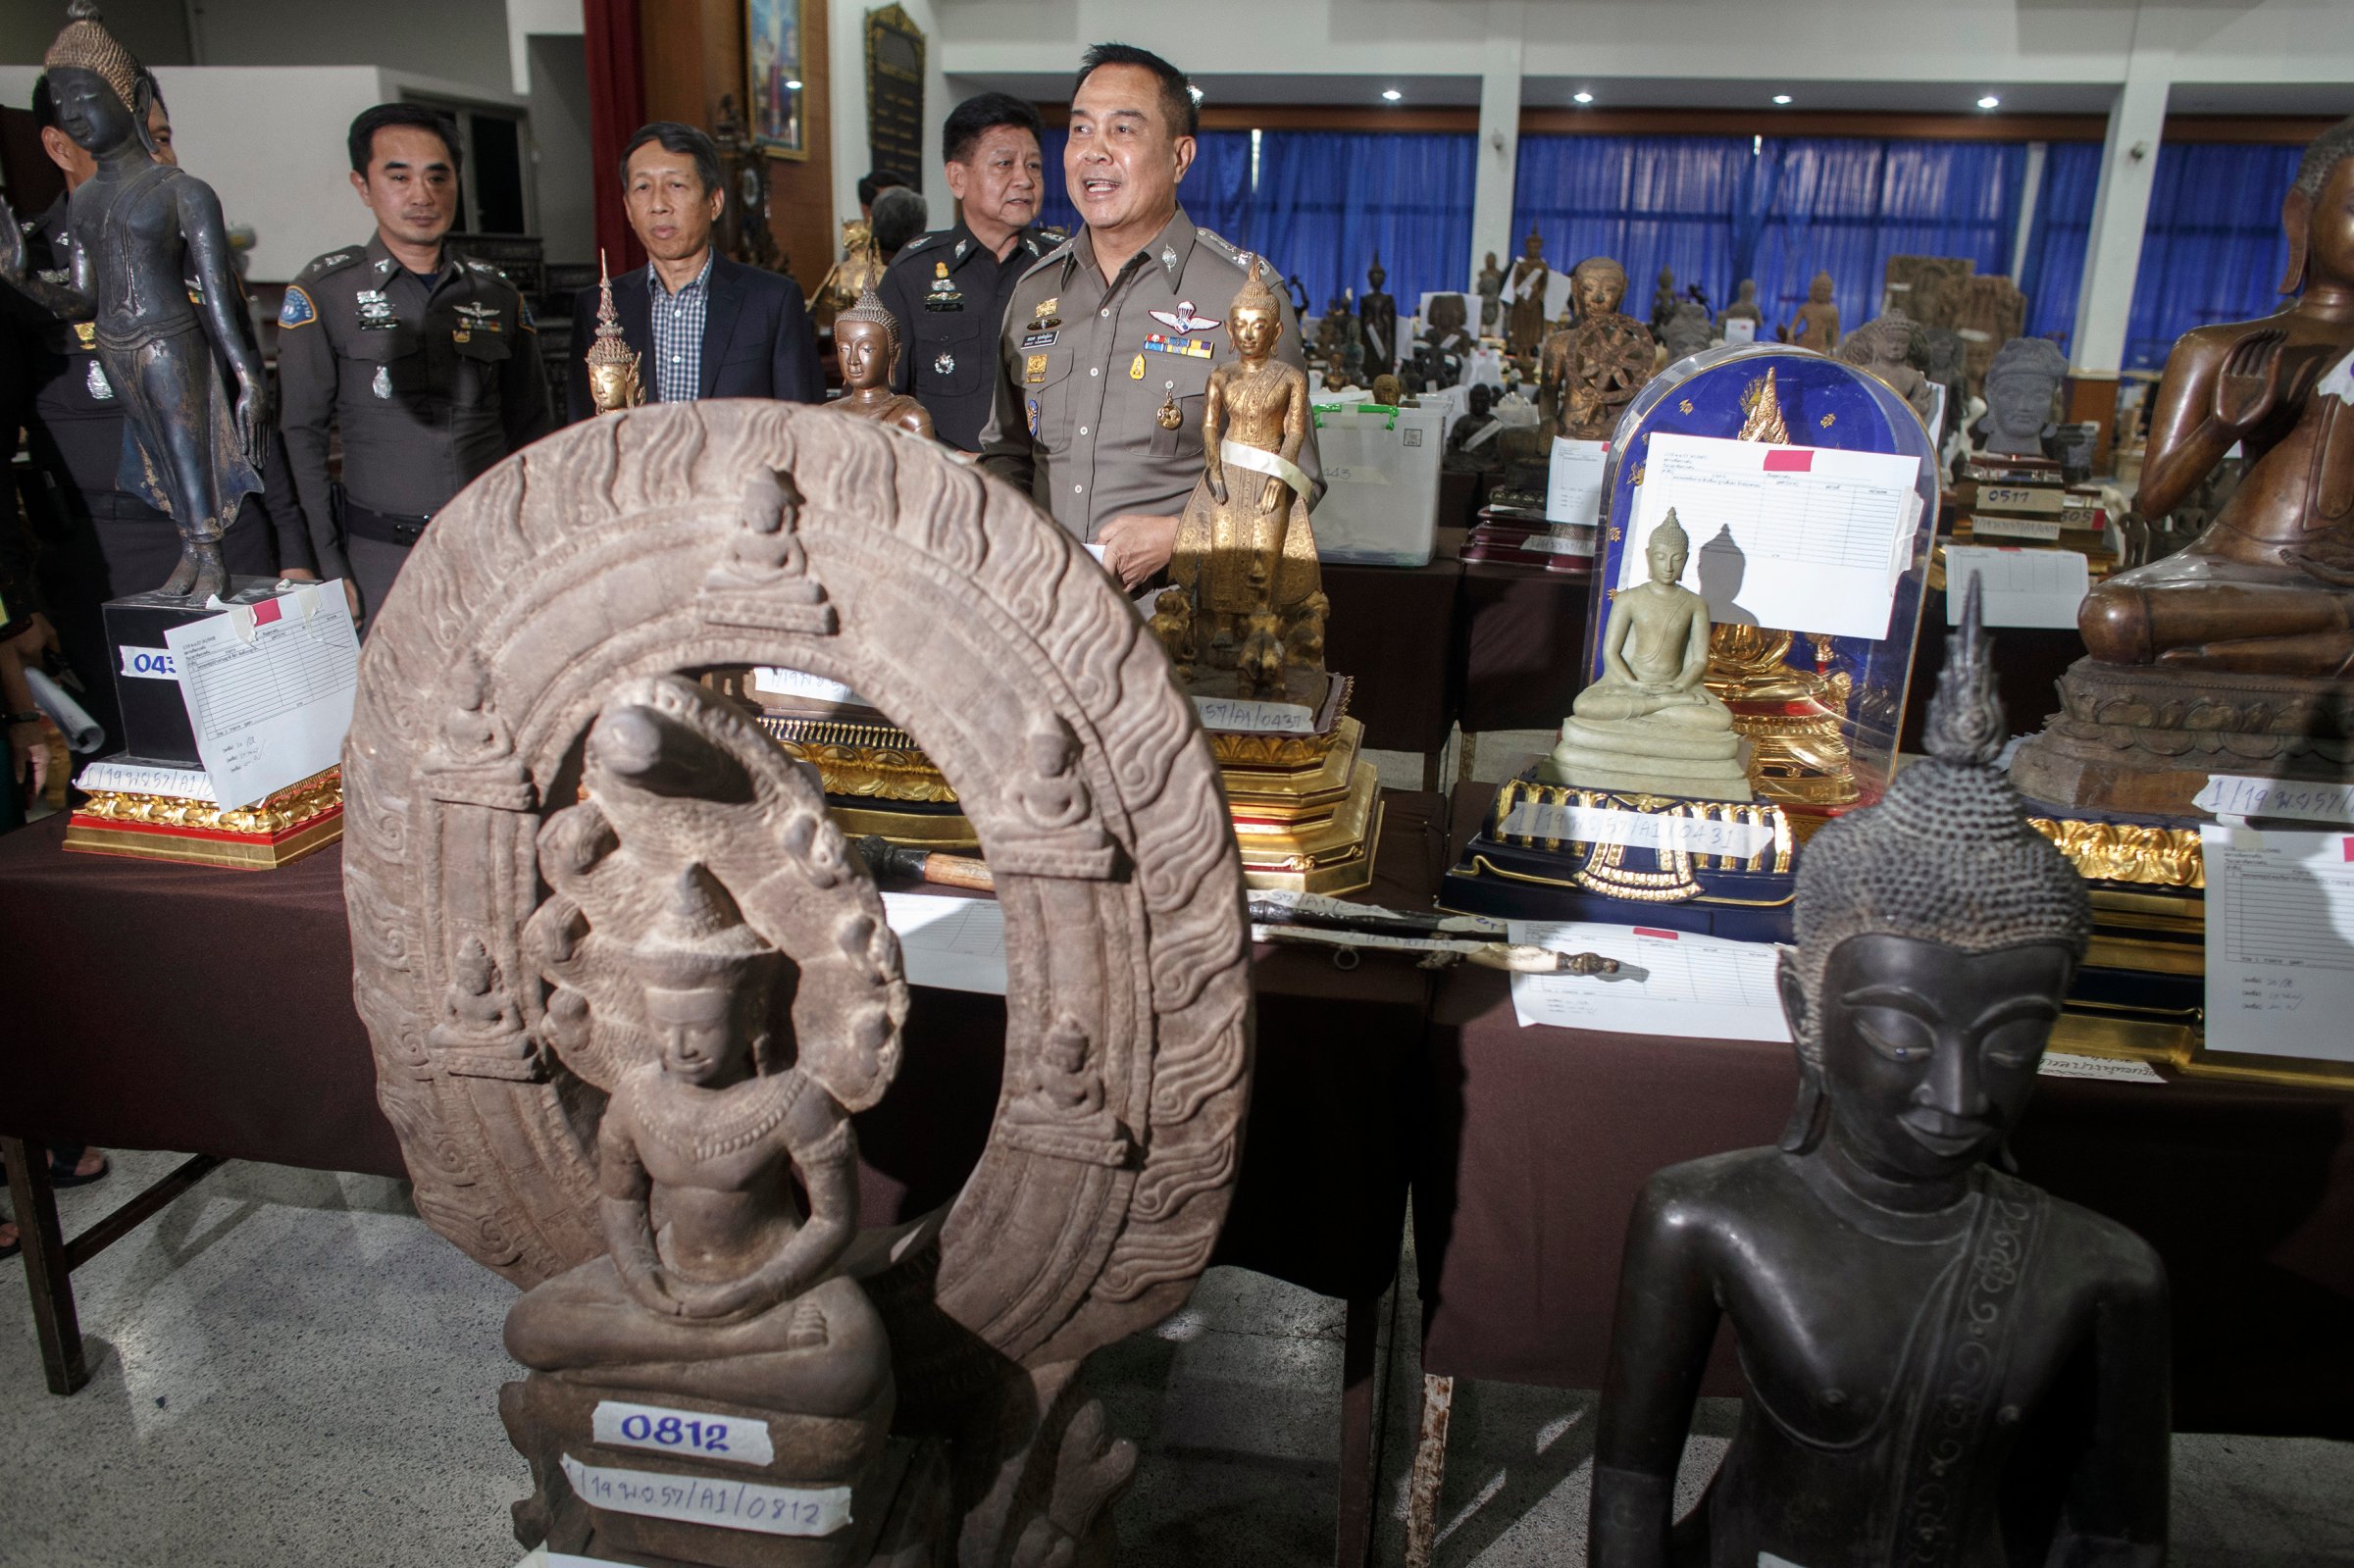 Poompanmuang, chief of Royal Thai Police, stands among antique Buddha statues that were seized during an investigation into Chayaphan, a former commissioner of the Central Investigation Bureau, at a military base in Bangkok